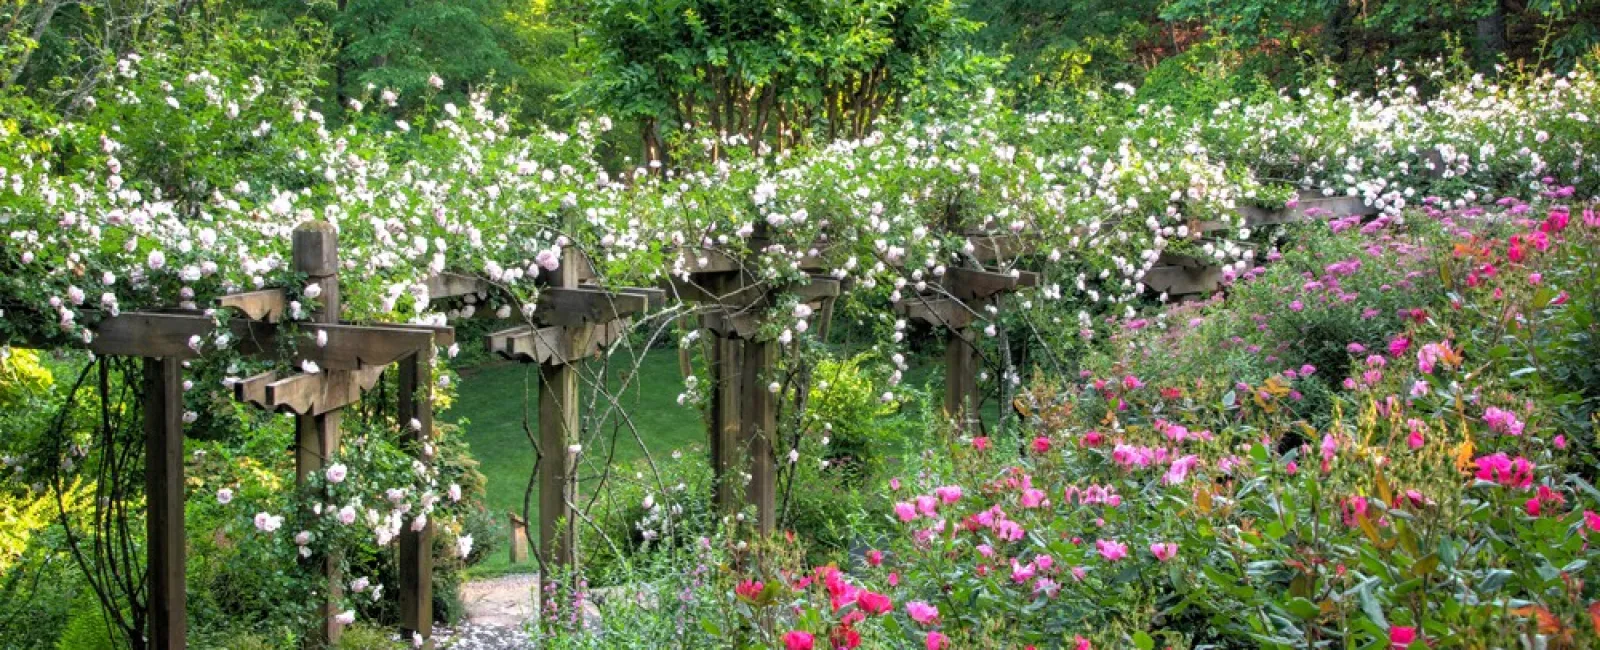 6 Reasons You Should Add an Arbor to Your Landscape